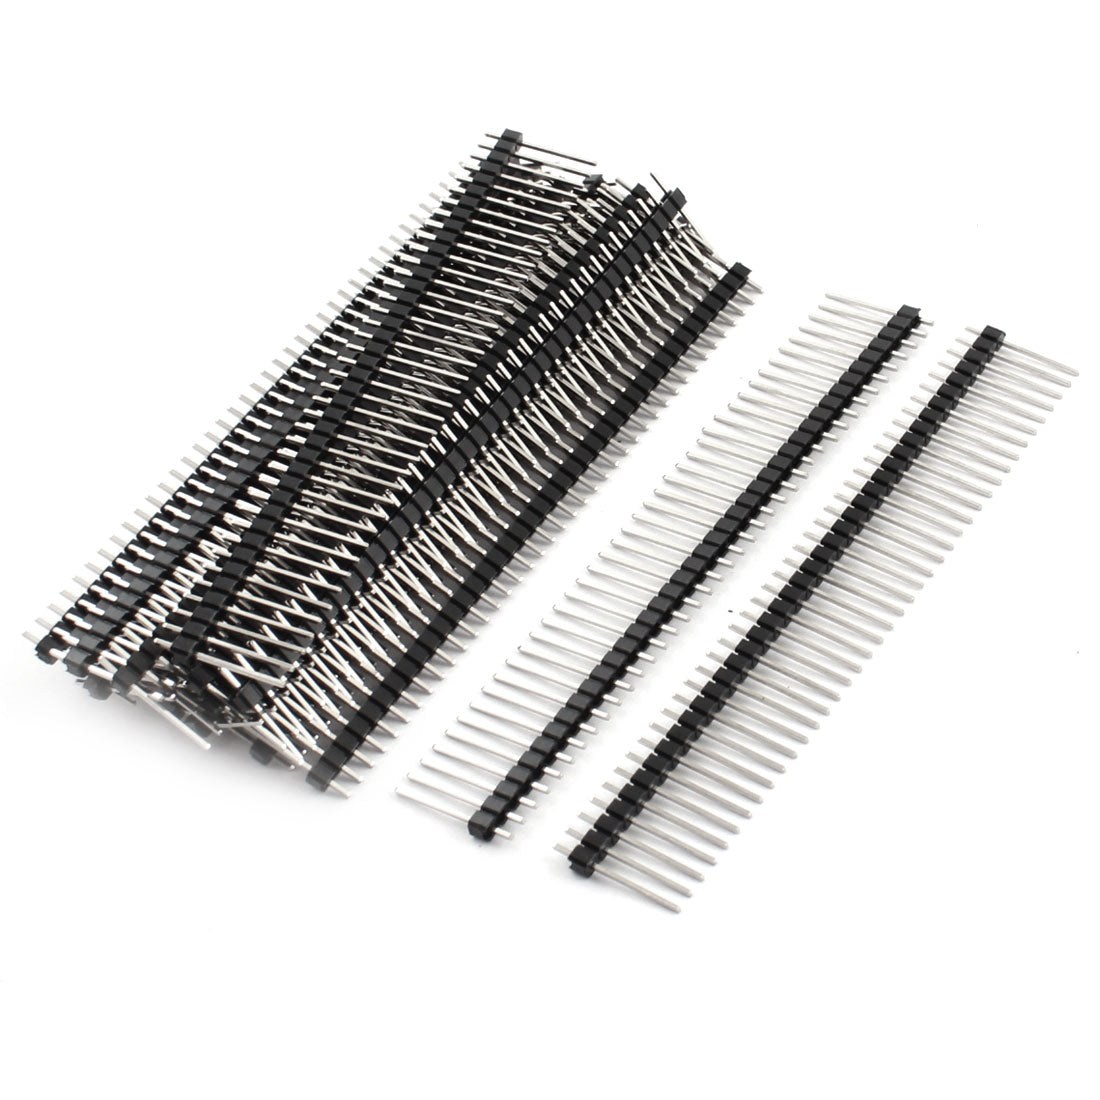 uxcell Uxcell 20 Pcs 17mm Length 2.54mm Spacing 40Pin Male Single Row Through Hole Mount Pin Header Connector Strip